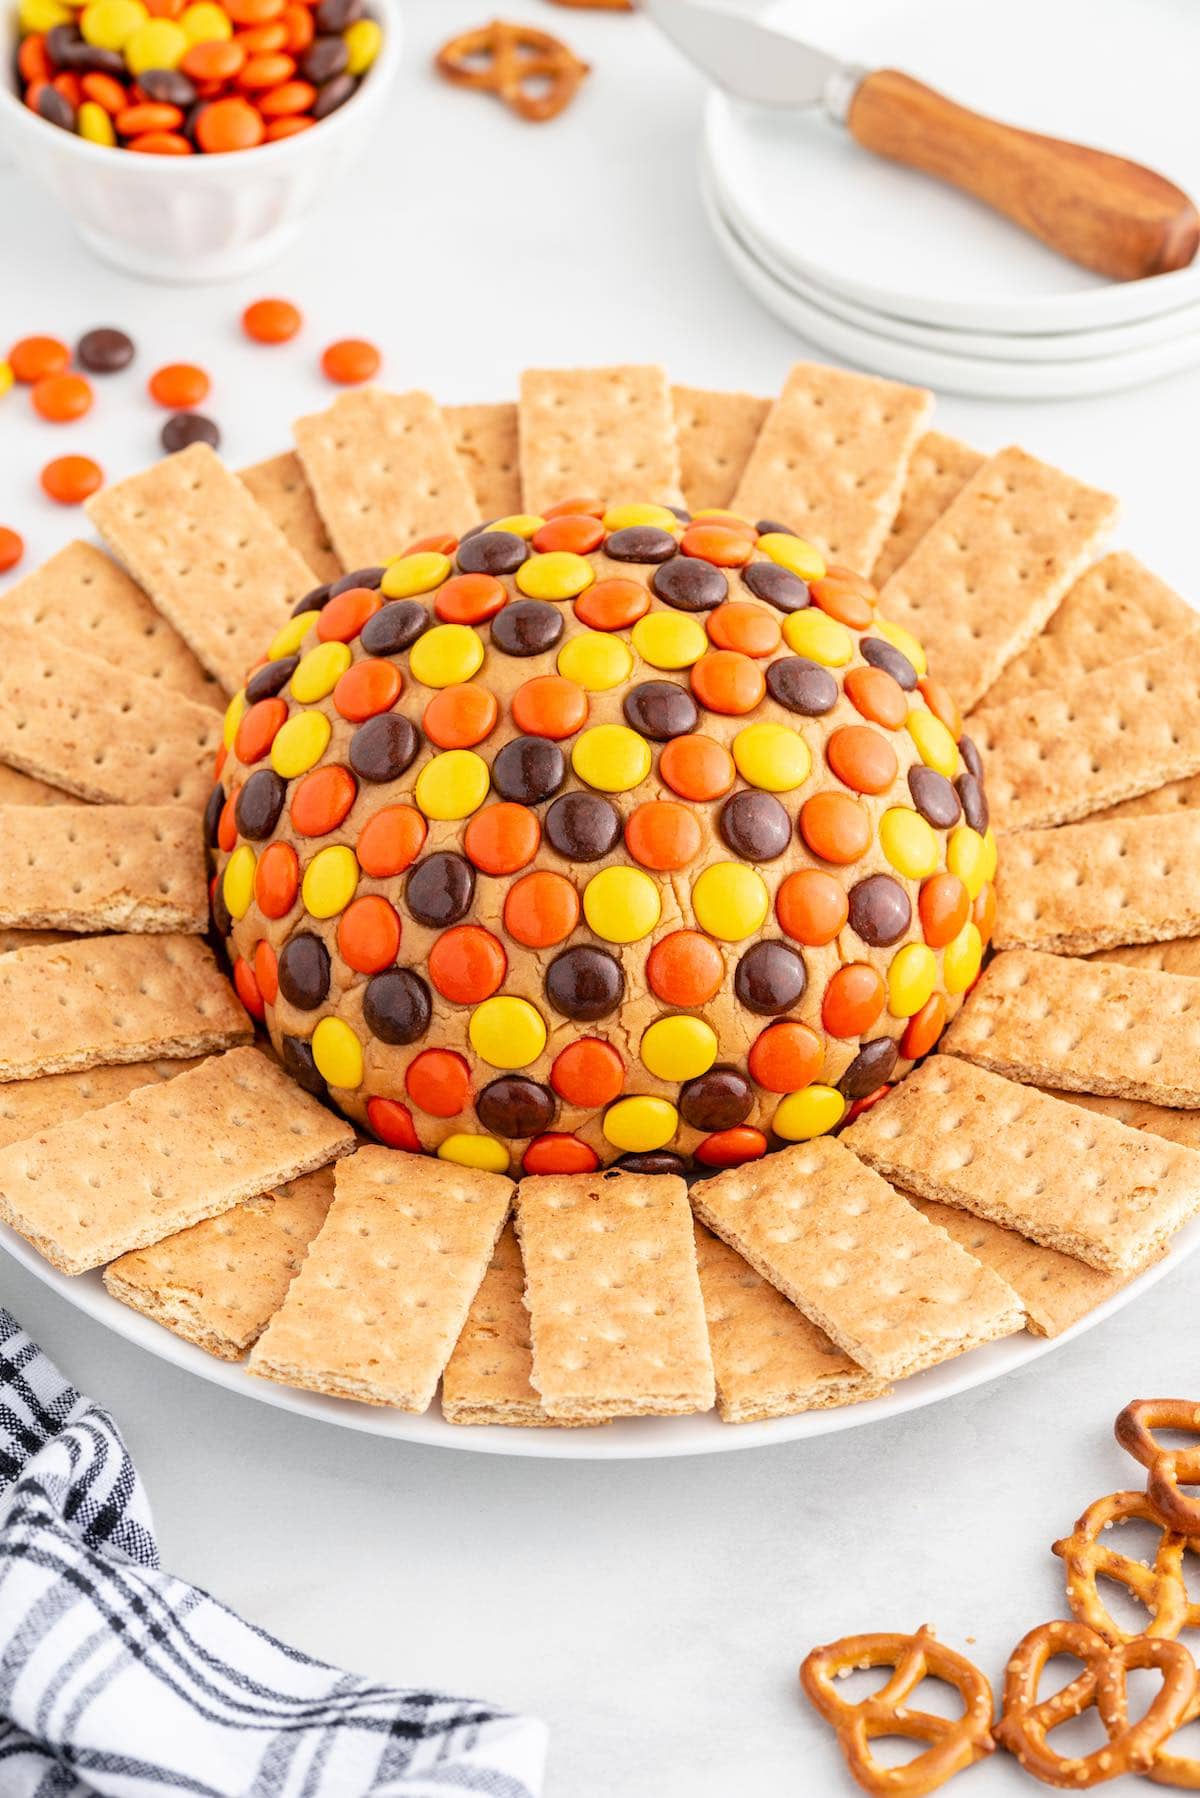 Reese's Pieces Peanut Butter Ball hero image